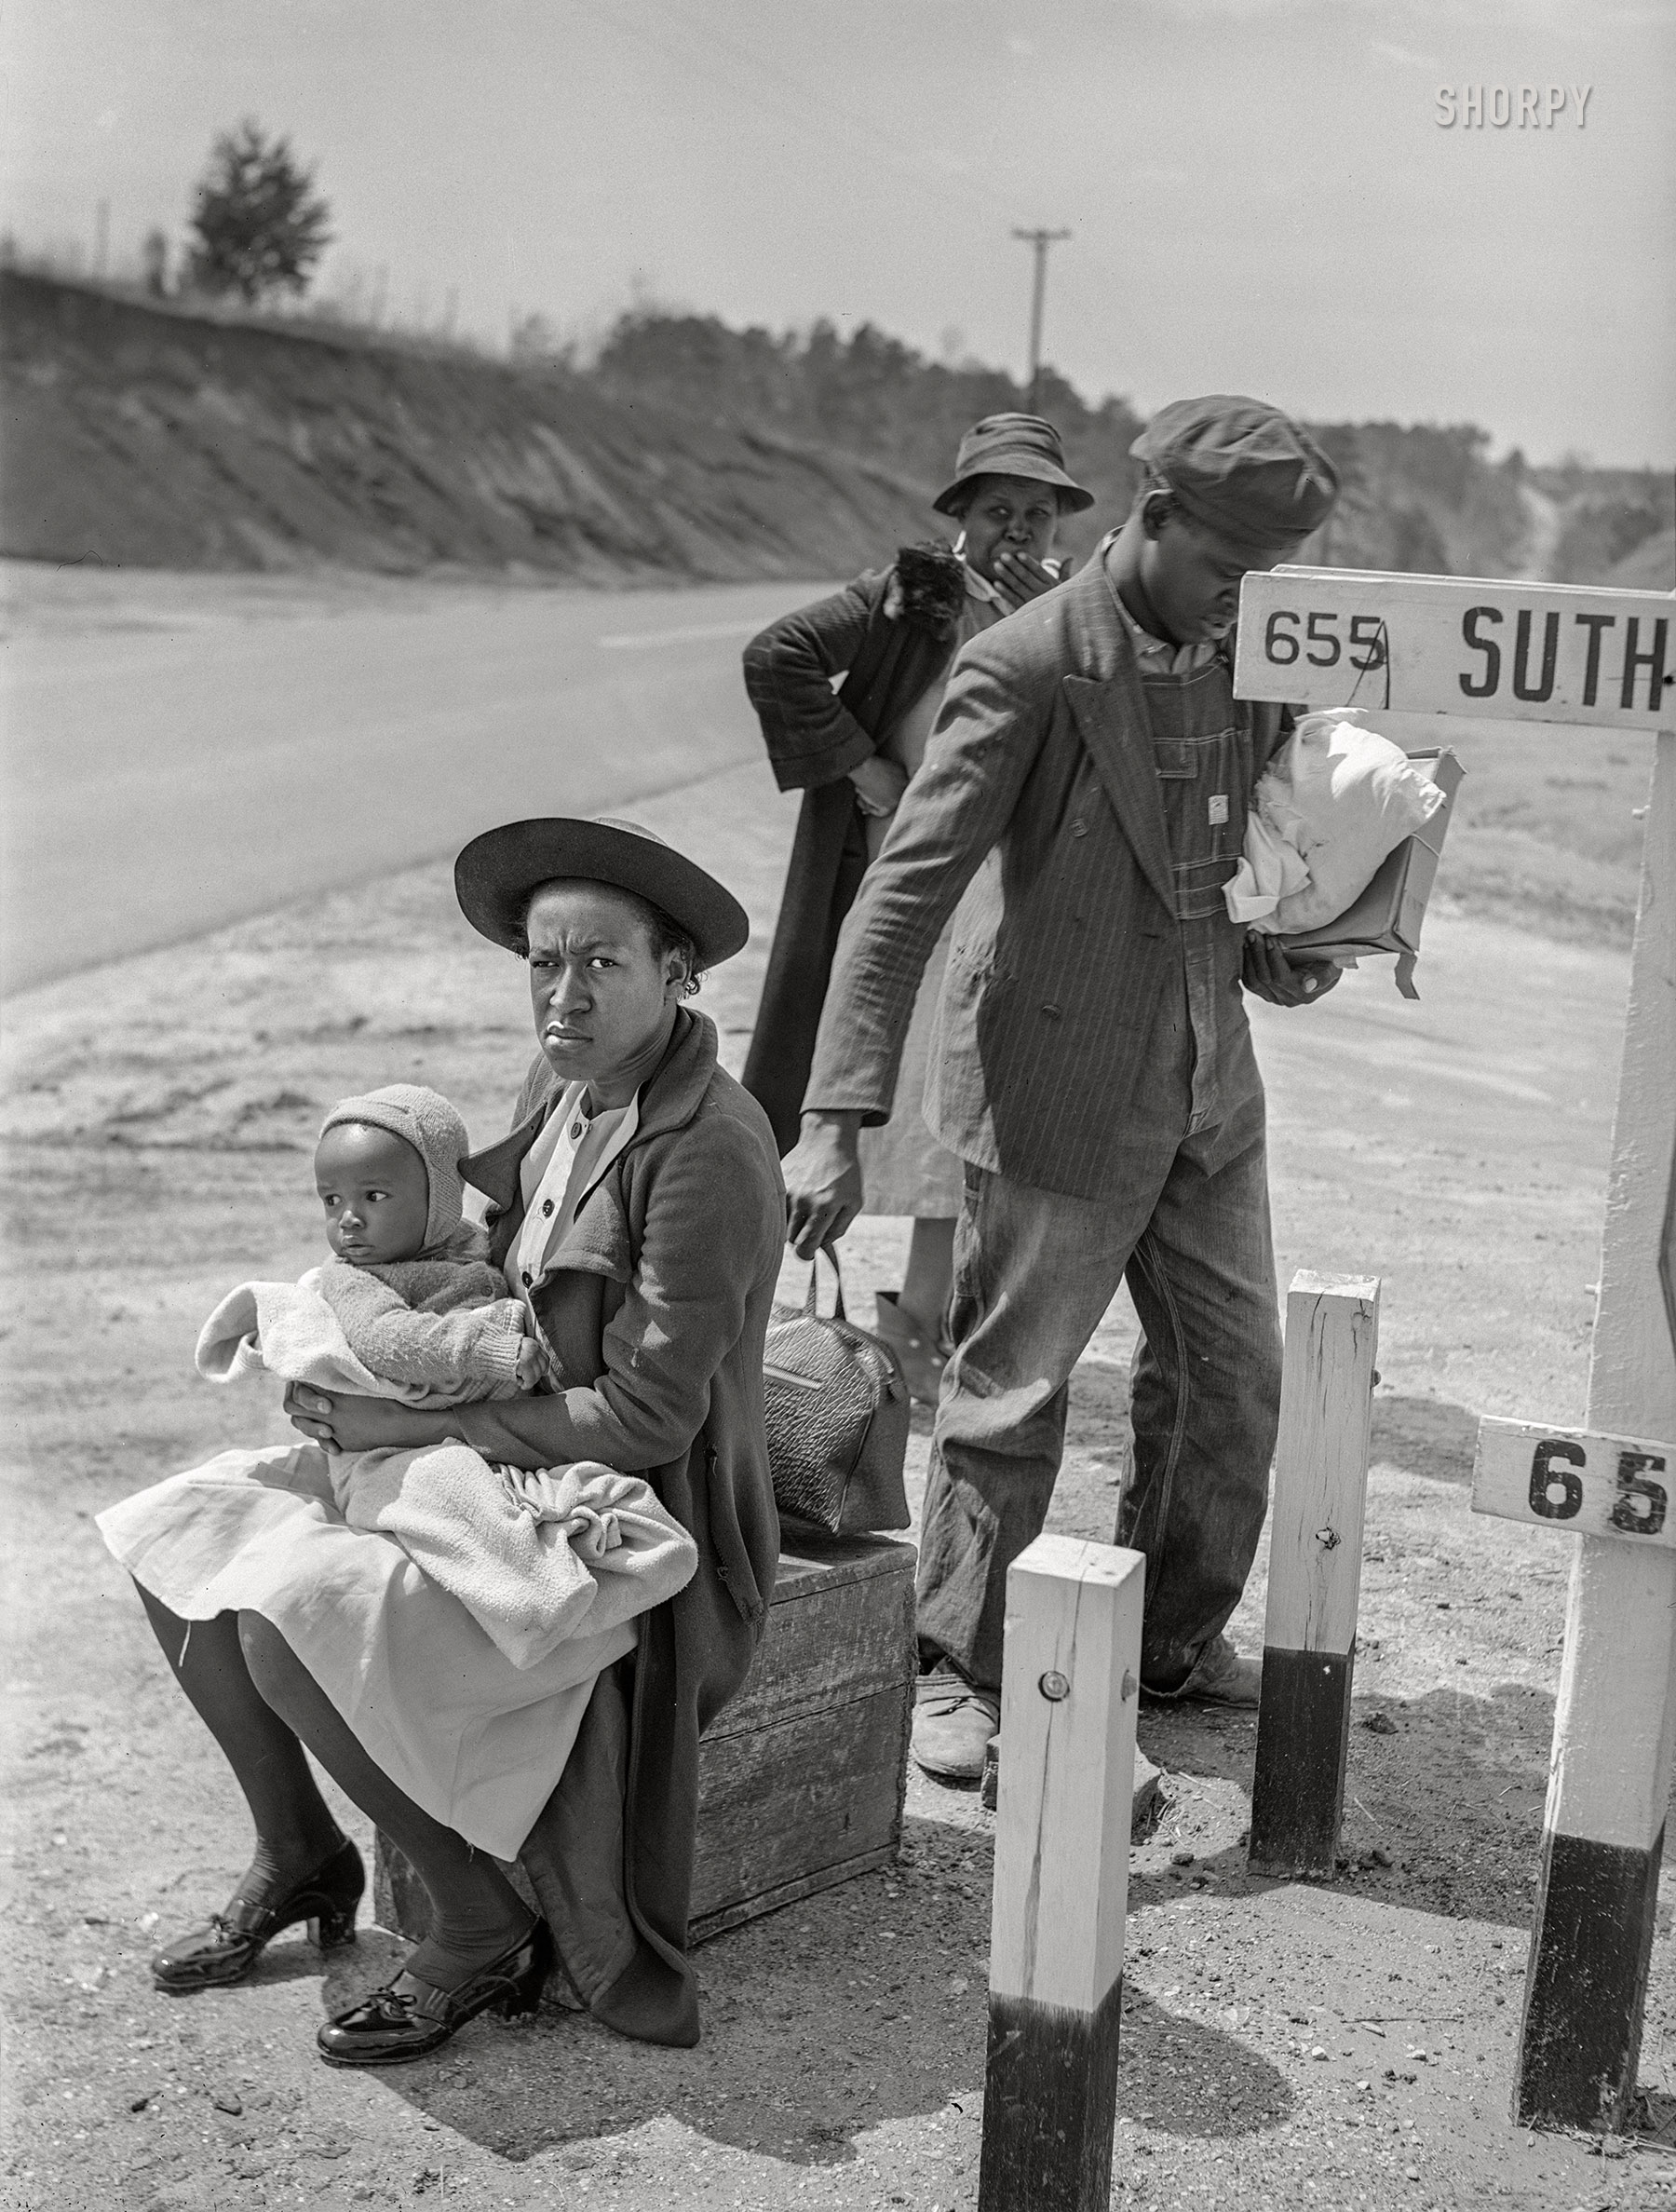 March 1941. "Negro family waiting for ride into town. Halifax County, Virginia." Medium format acetate negative by John Vachon for the Farm Security Administration. View full size.